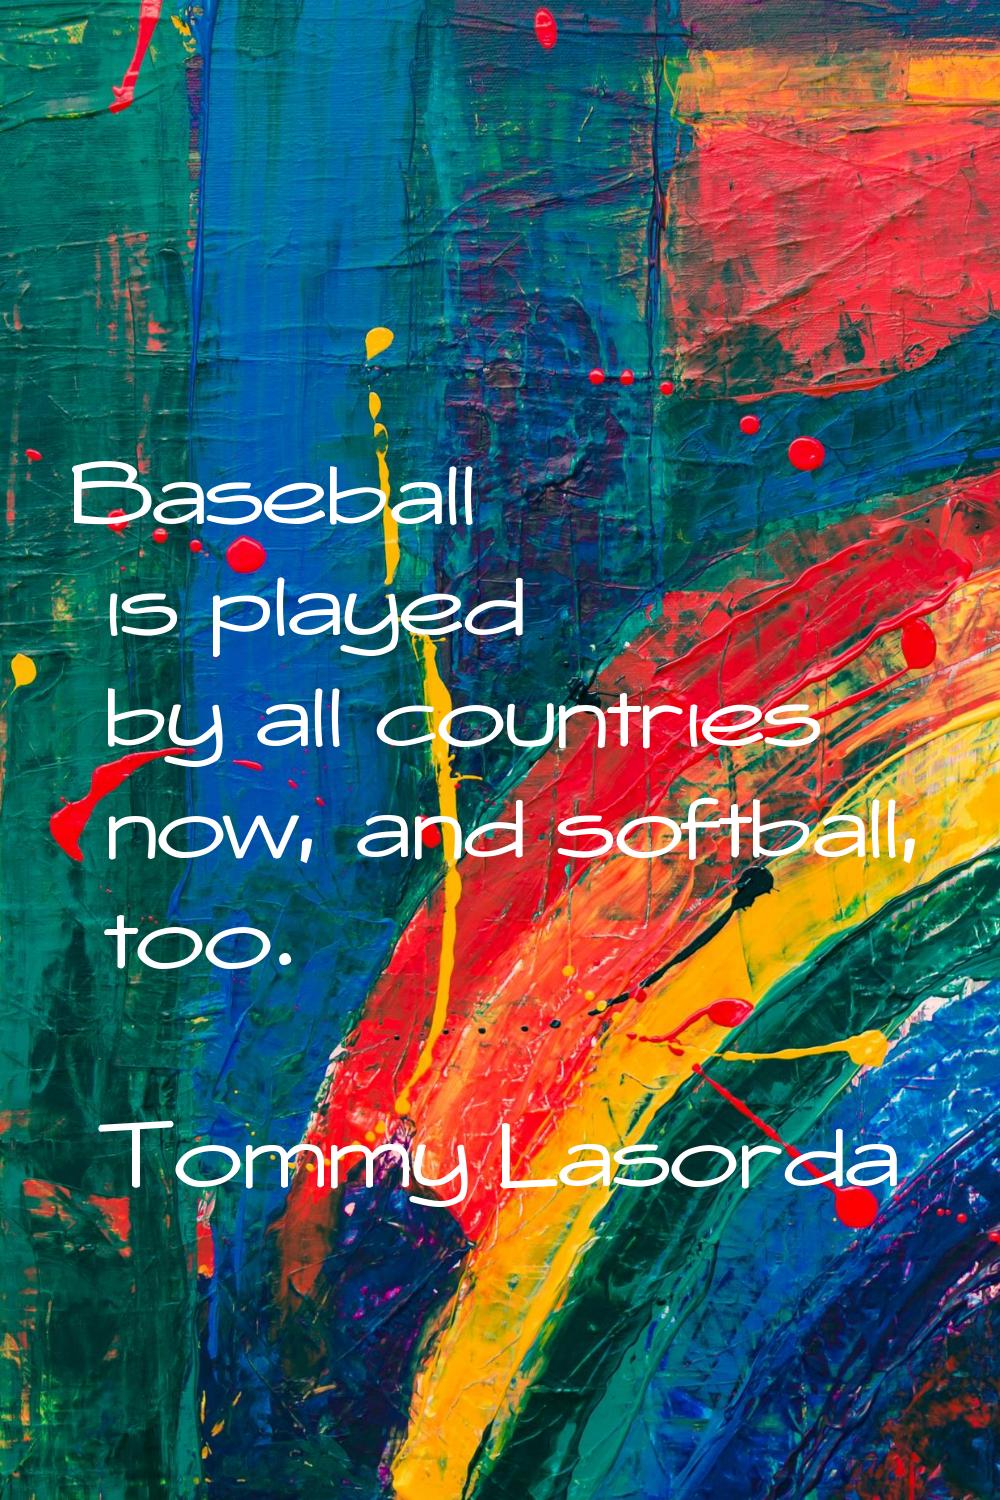 Baseball is played by all countries now, and softball, too.